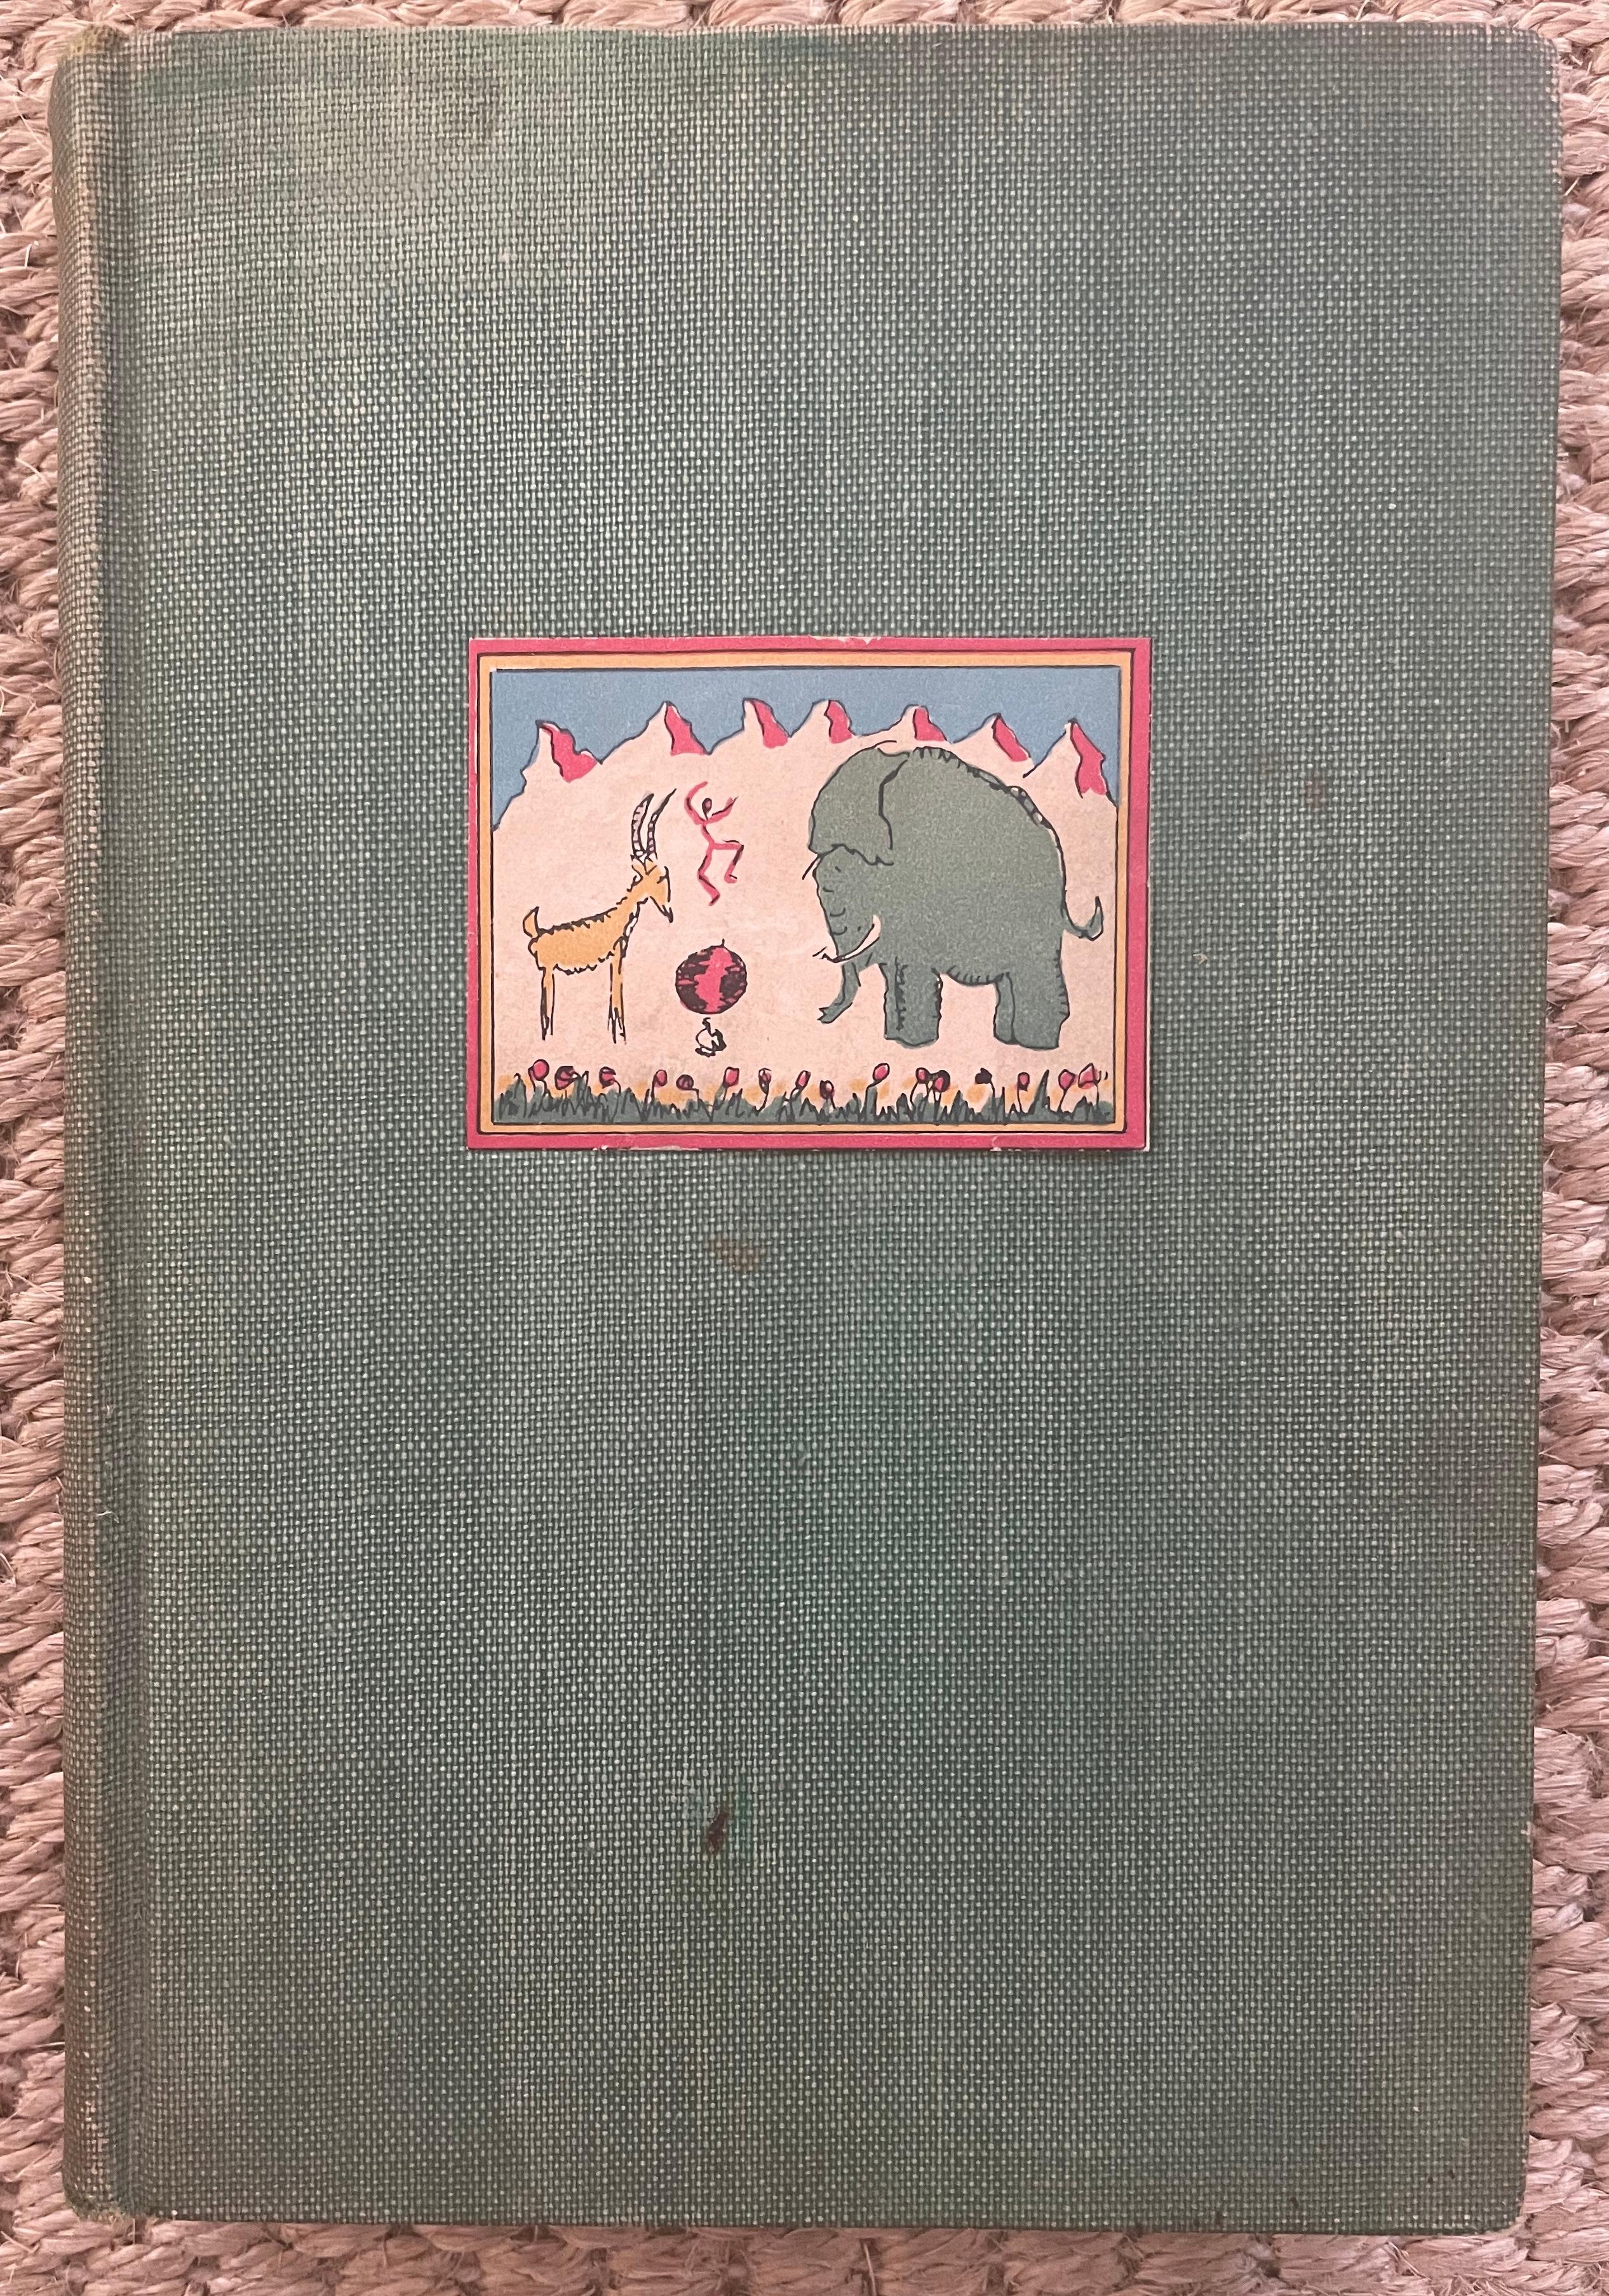 An Elephant Up A Tree or Why The Elephants Decided to Remain Elephants Hendryk Willem Van Loon Simon & Schuster New York 1933. A delightfully erudite and charmingly illustrated story of civilization and its woes from the cerebral vantage point of